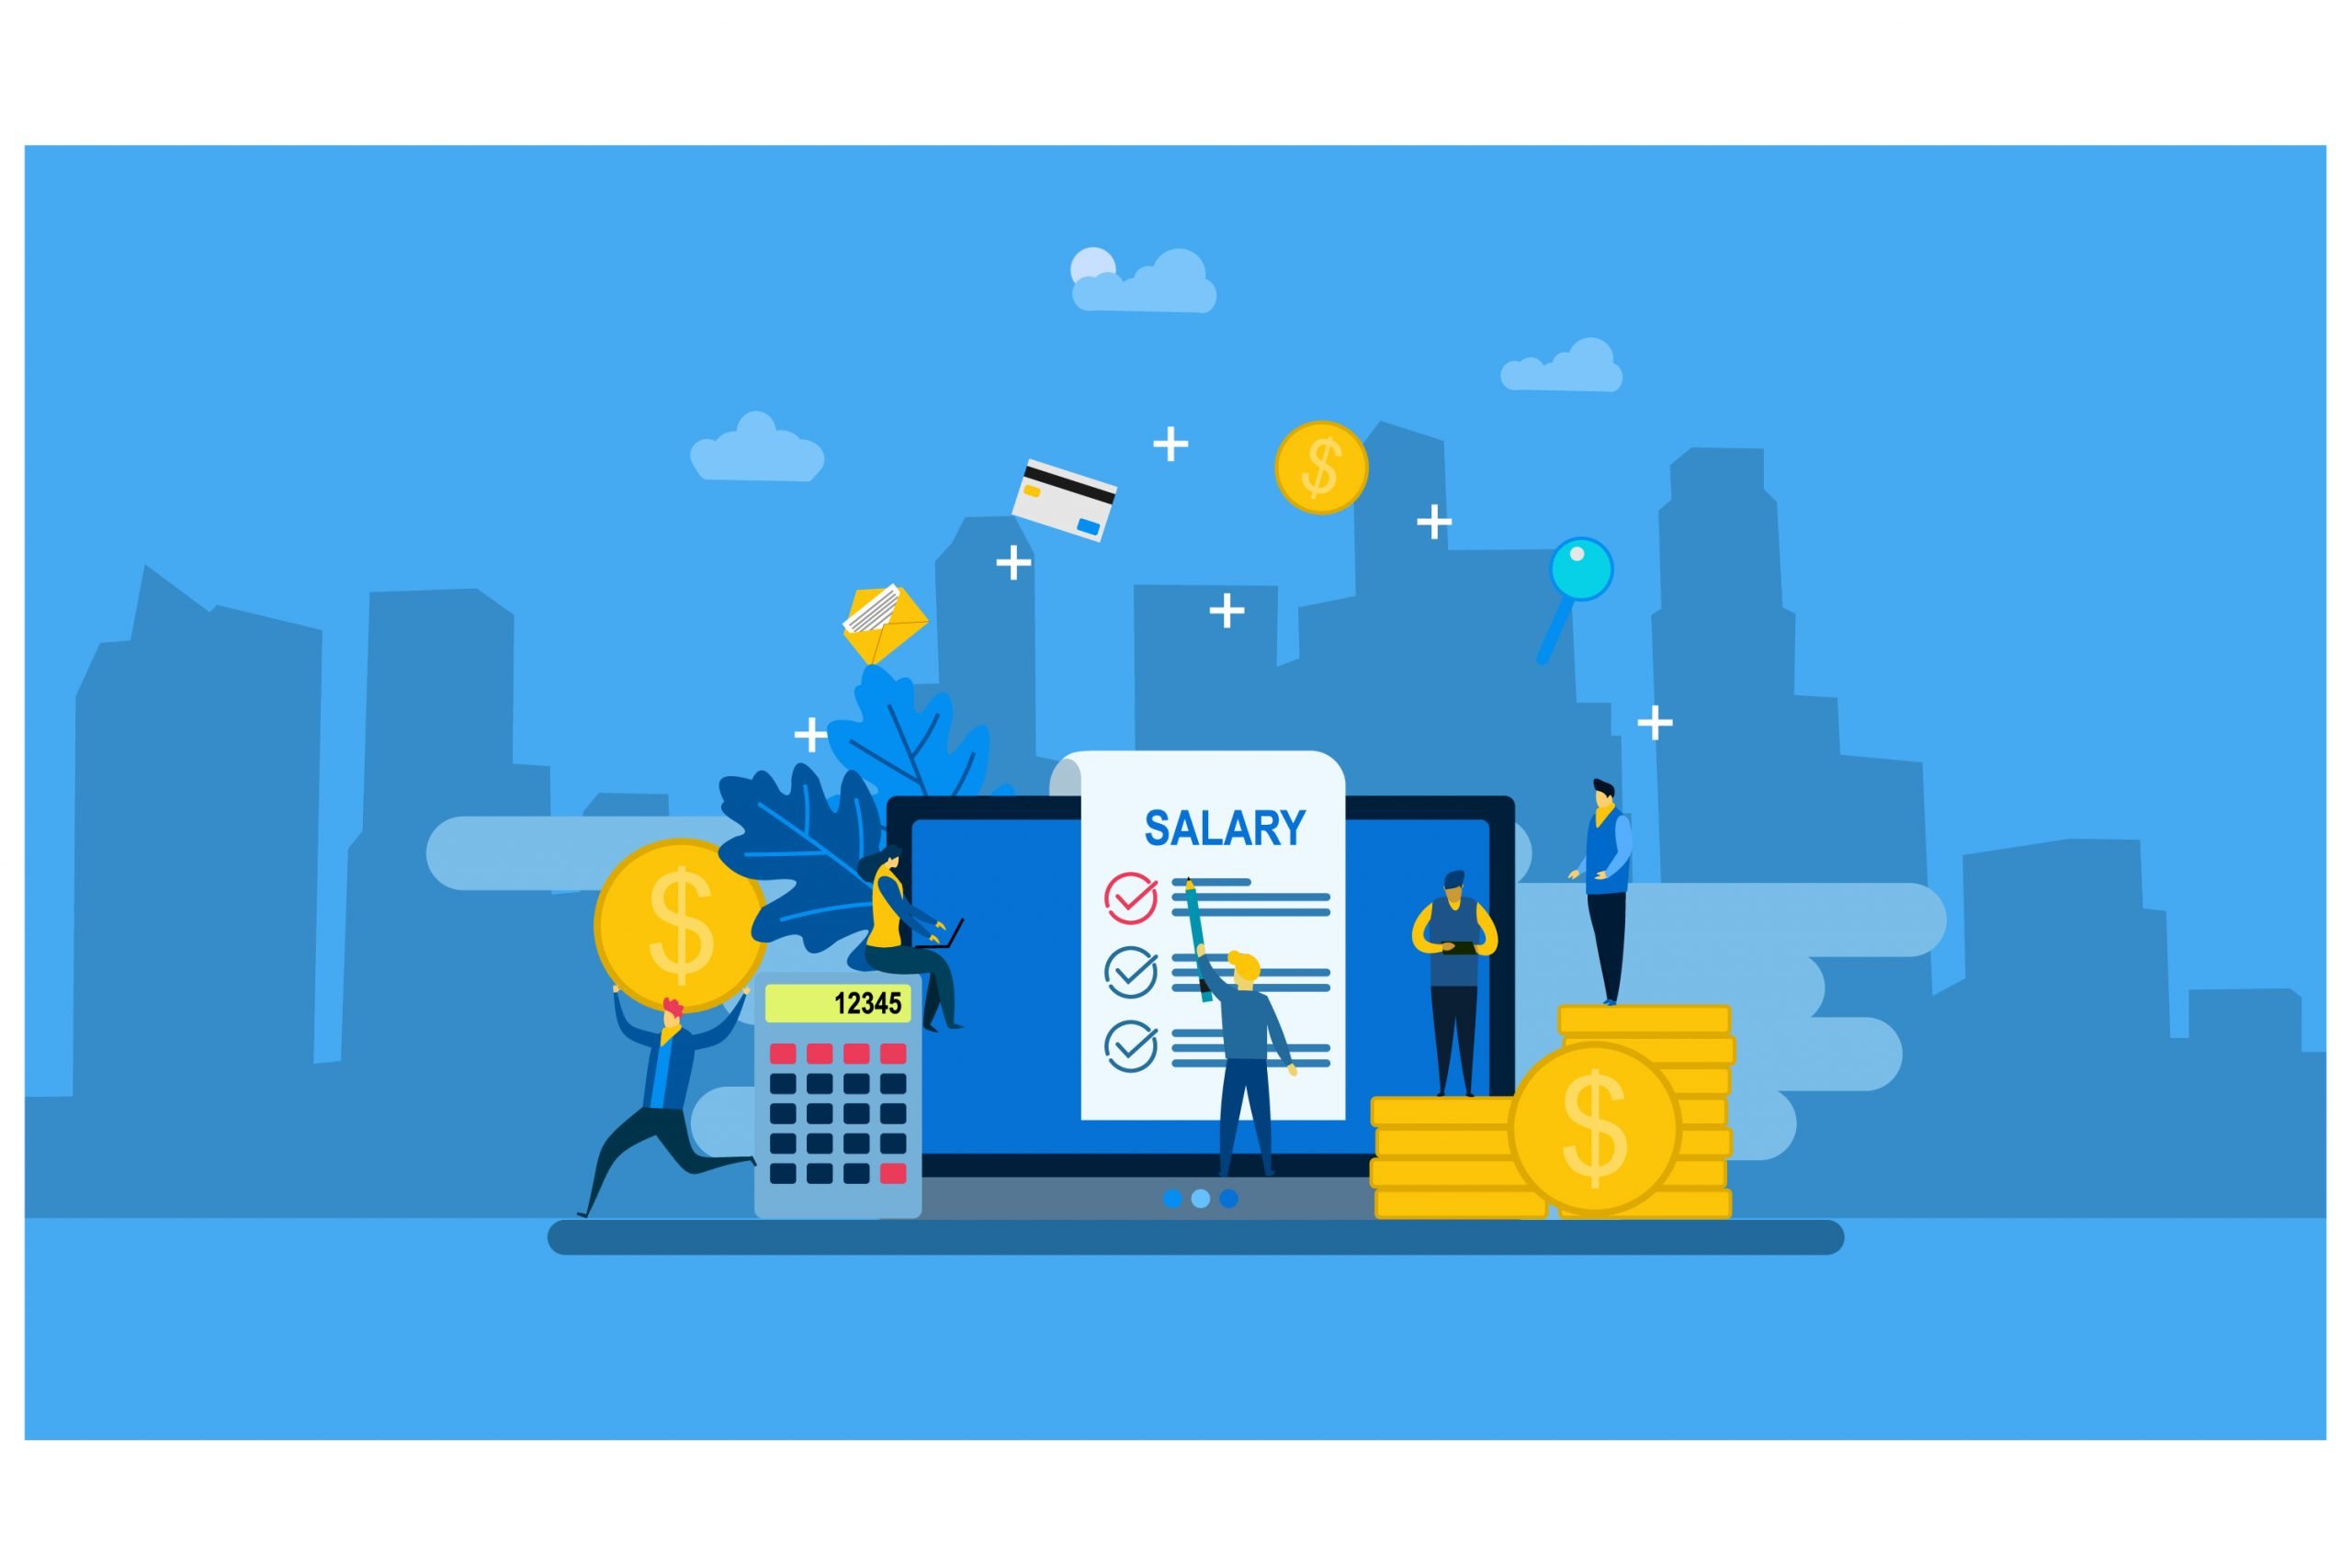 software sales: How Much Can You Earn as a Software Sales Rep?